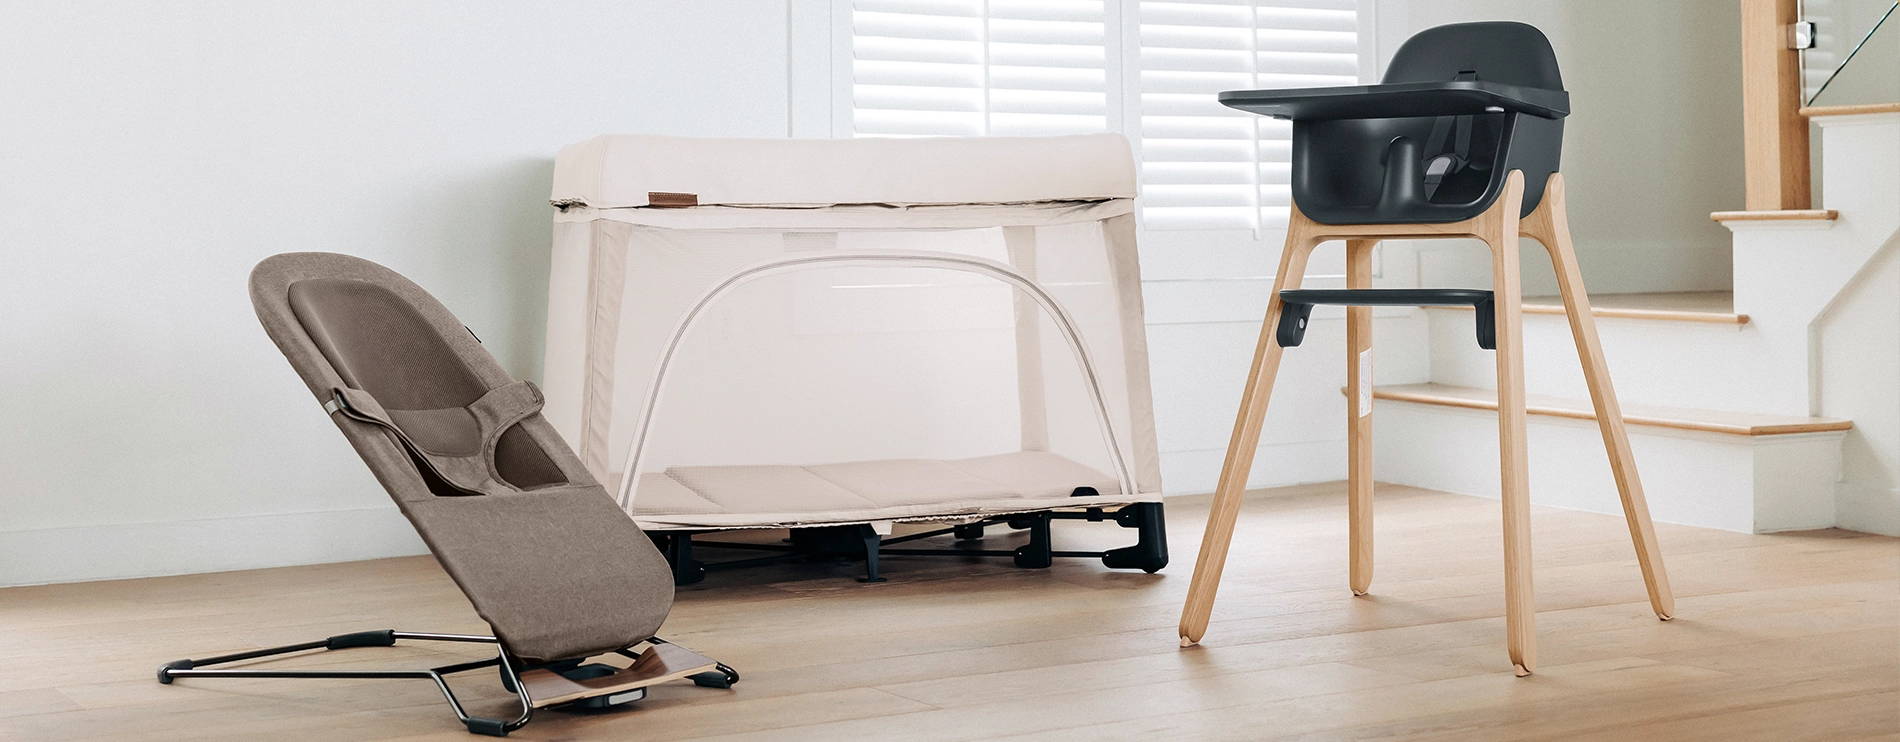 UPPAbaby In-Home Products